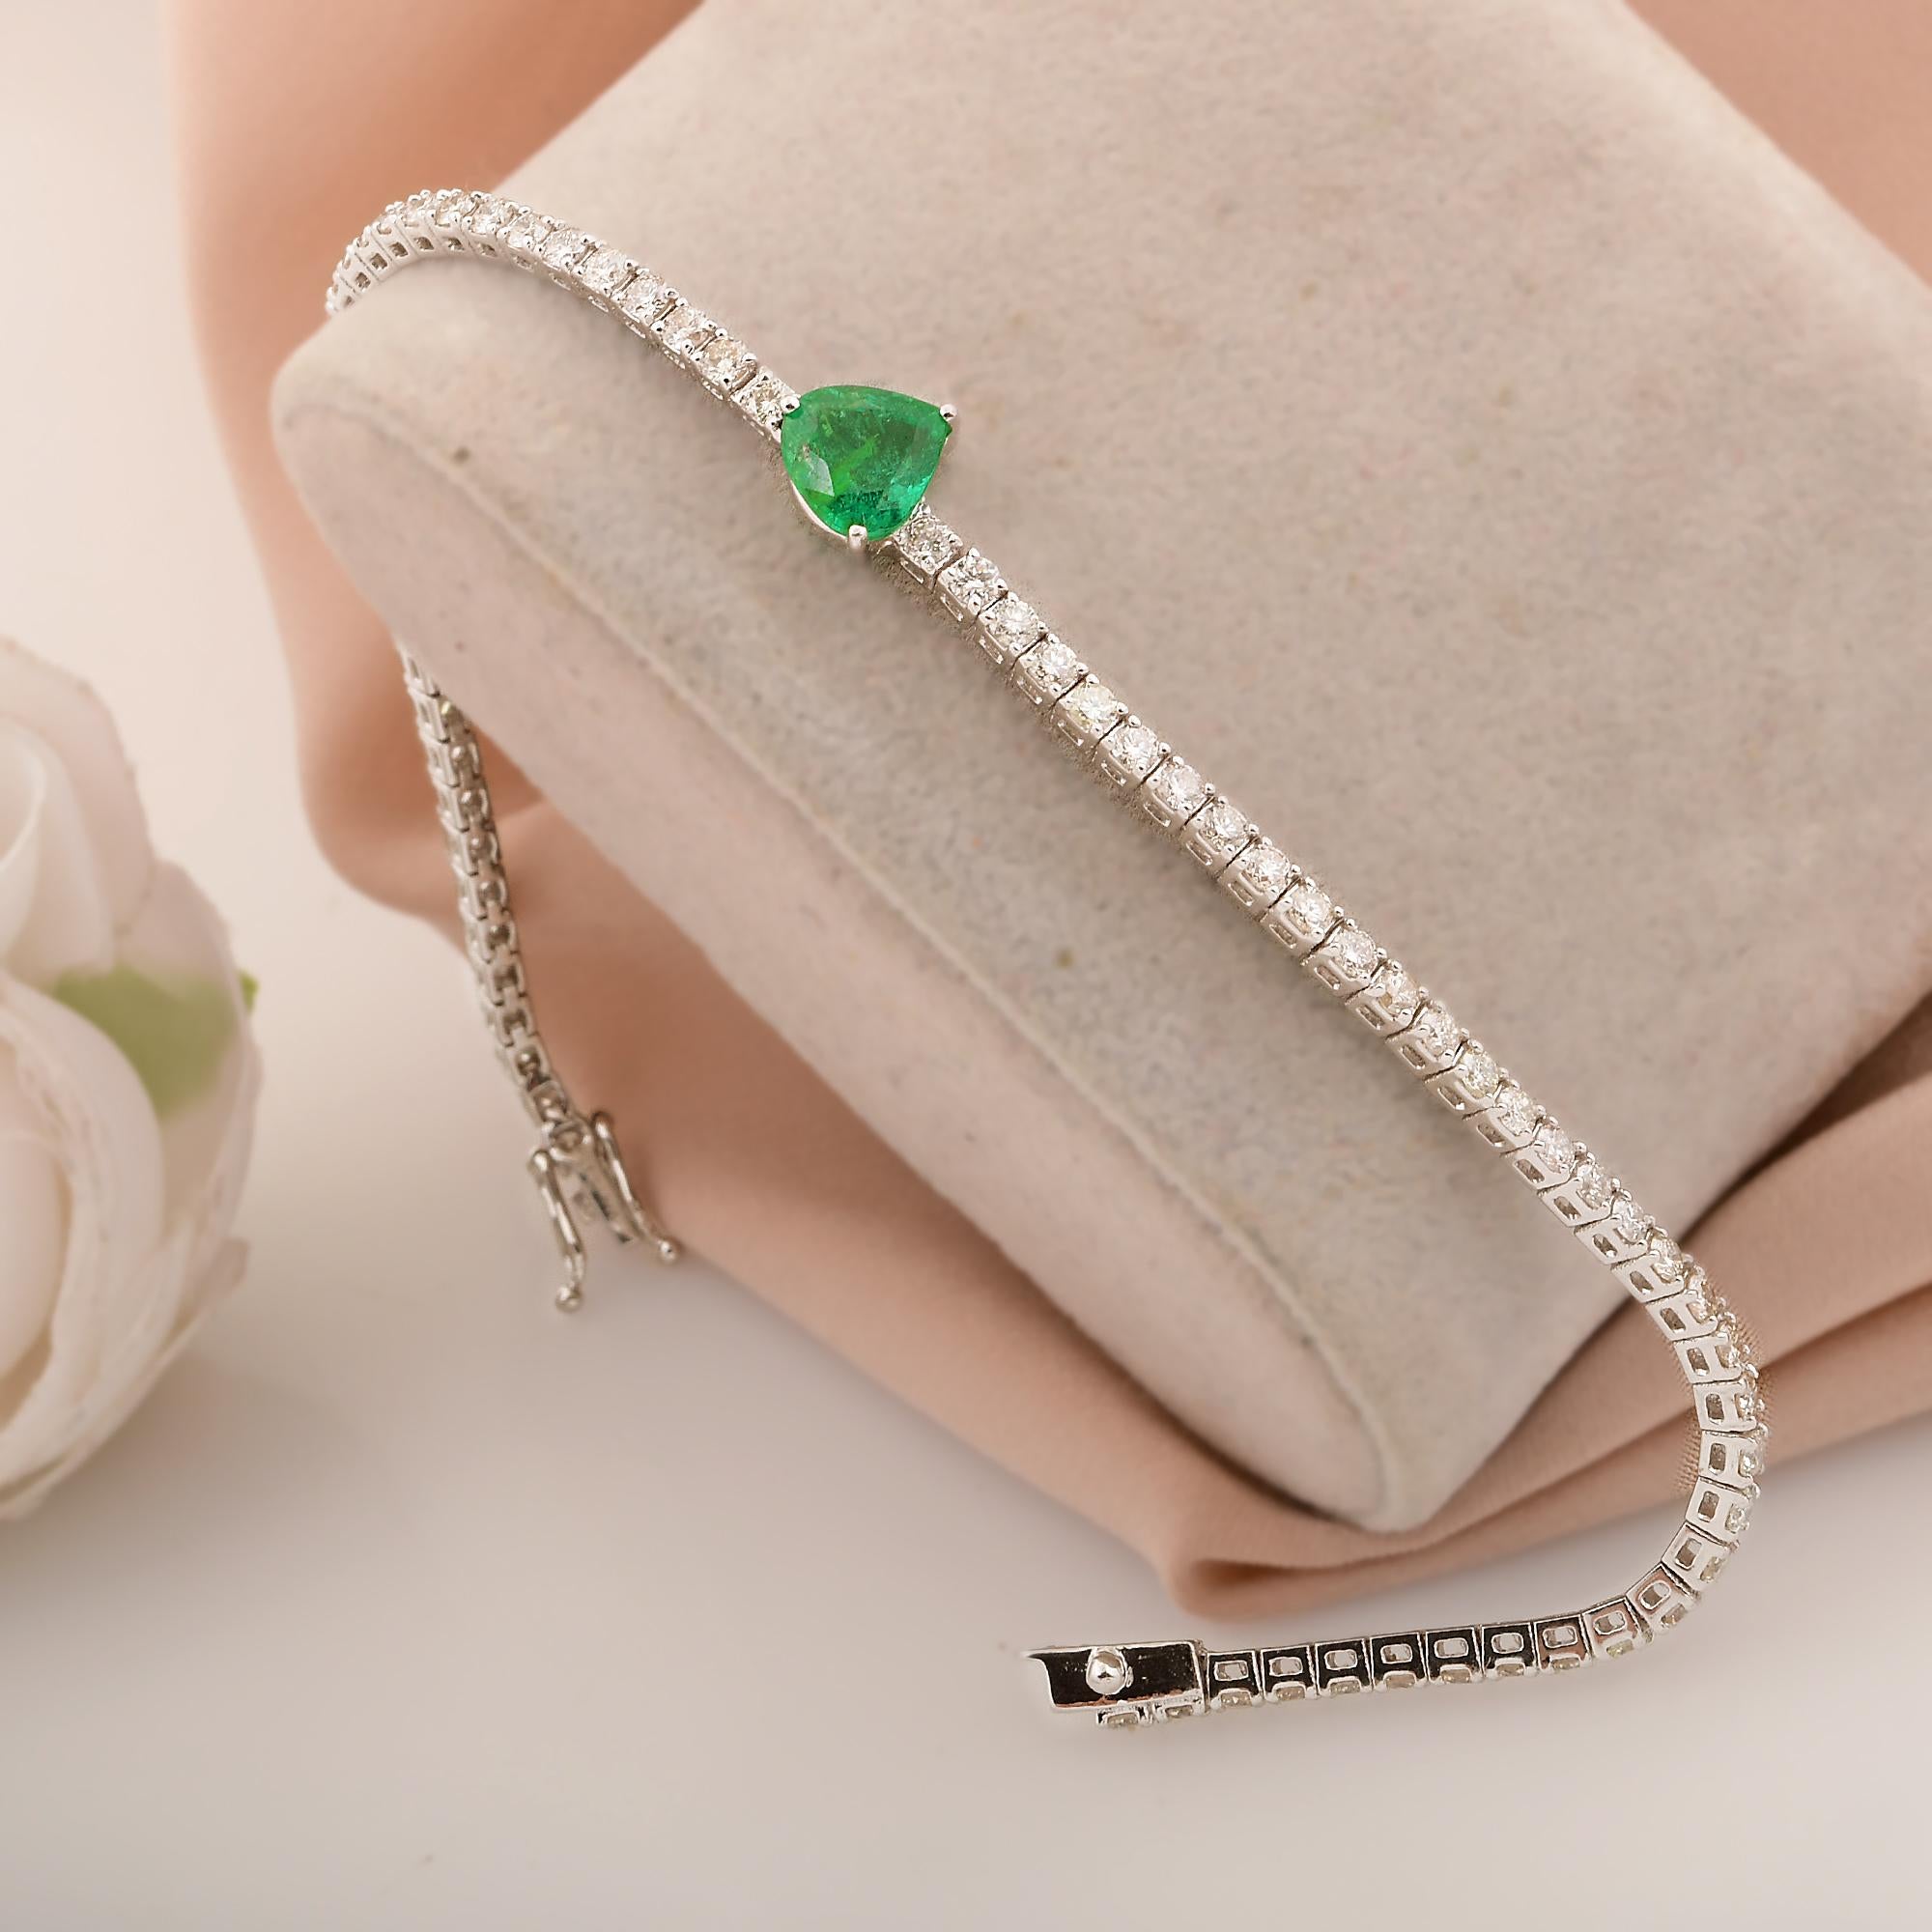 Code :- SFBR-4084B 
Gross Wt :- 7.19 gm
14k White Gold Wt :- 6.45 gm
Diamond Wt :- 2.53 Ct.  ( AVERAGE DIAMOND CLARITY SI1-SI2 & COLOR H-I )
Emerald Wt :- 1.16 Ct.
Bracelet Size :- 7 Inch
✦ Sizing
.....................
We can adjust most items to